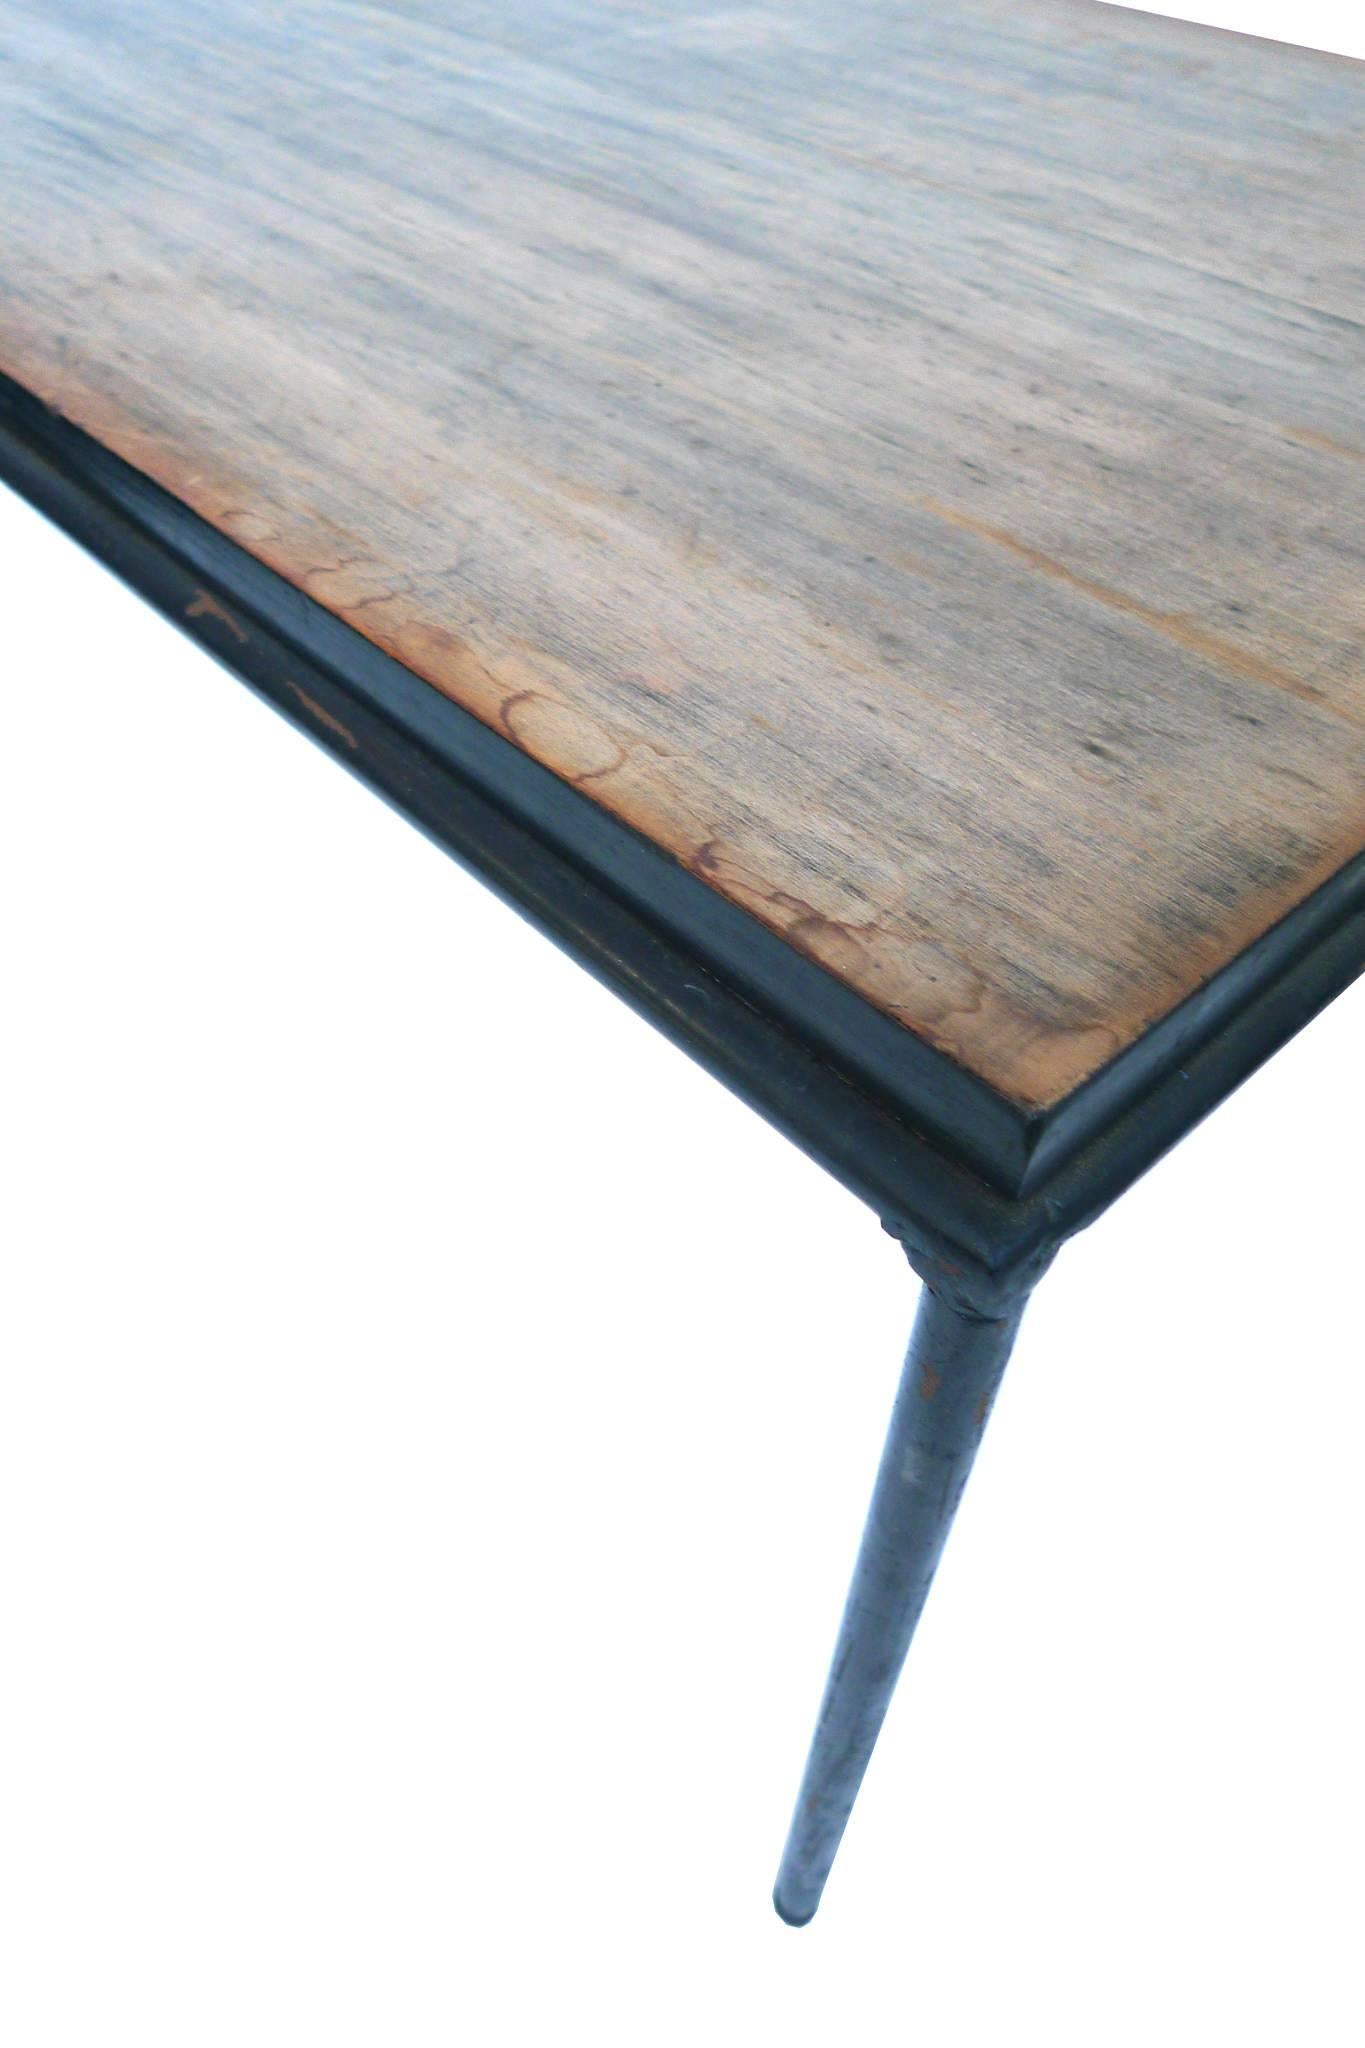 Burnished Paul McCobb Wrought Iron and Teak Coffee Table